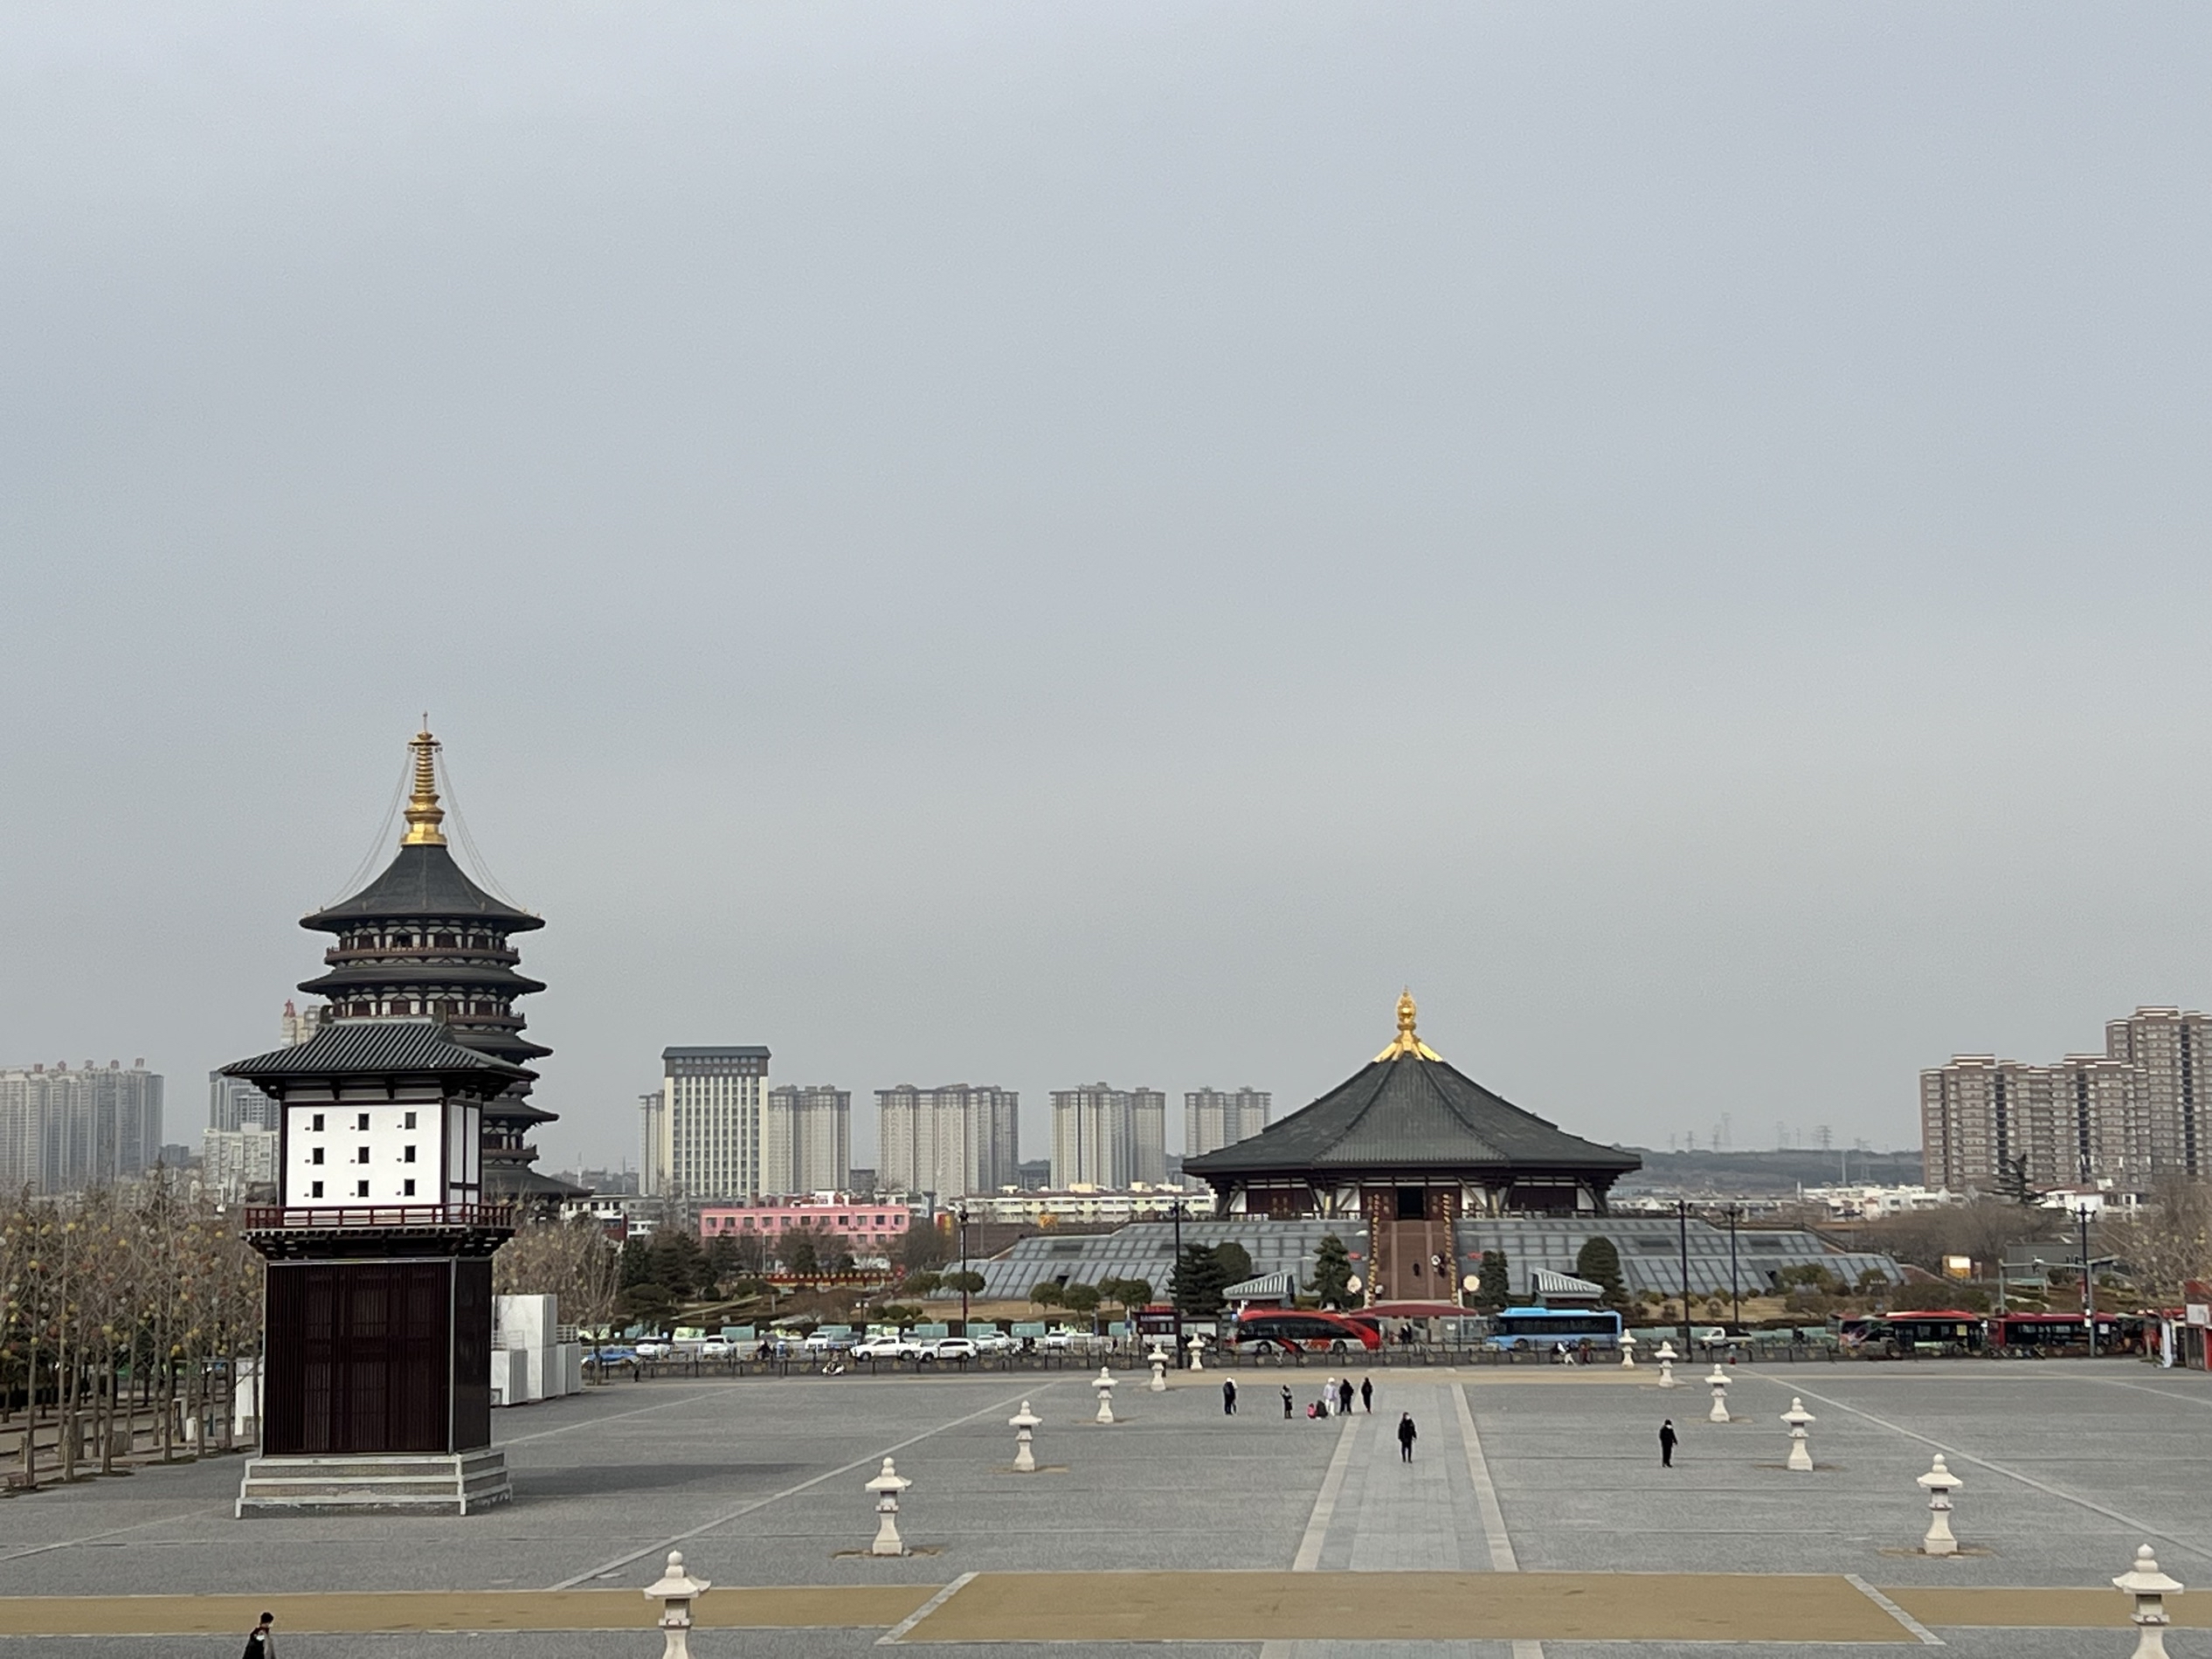 Luoyang Sui and Tang National Heritage Park